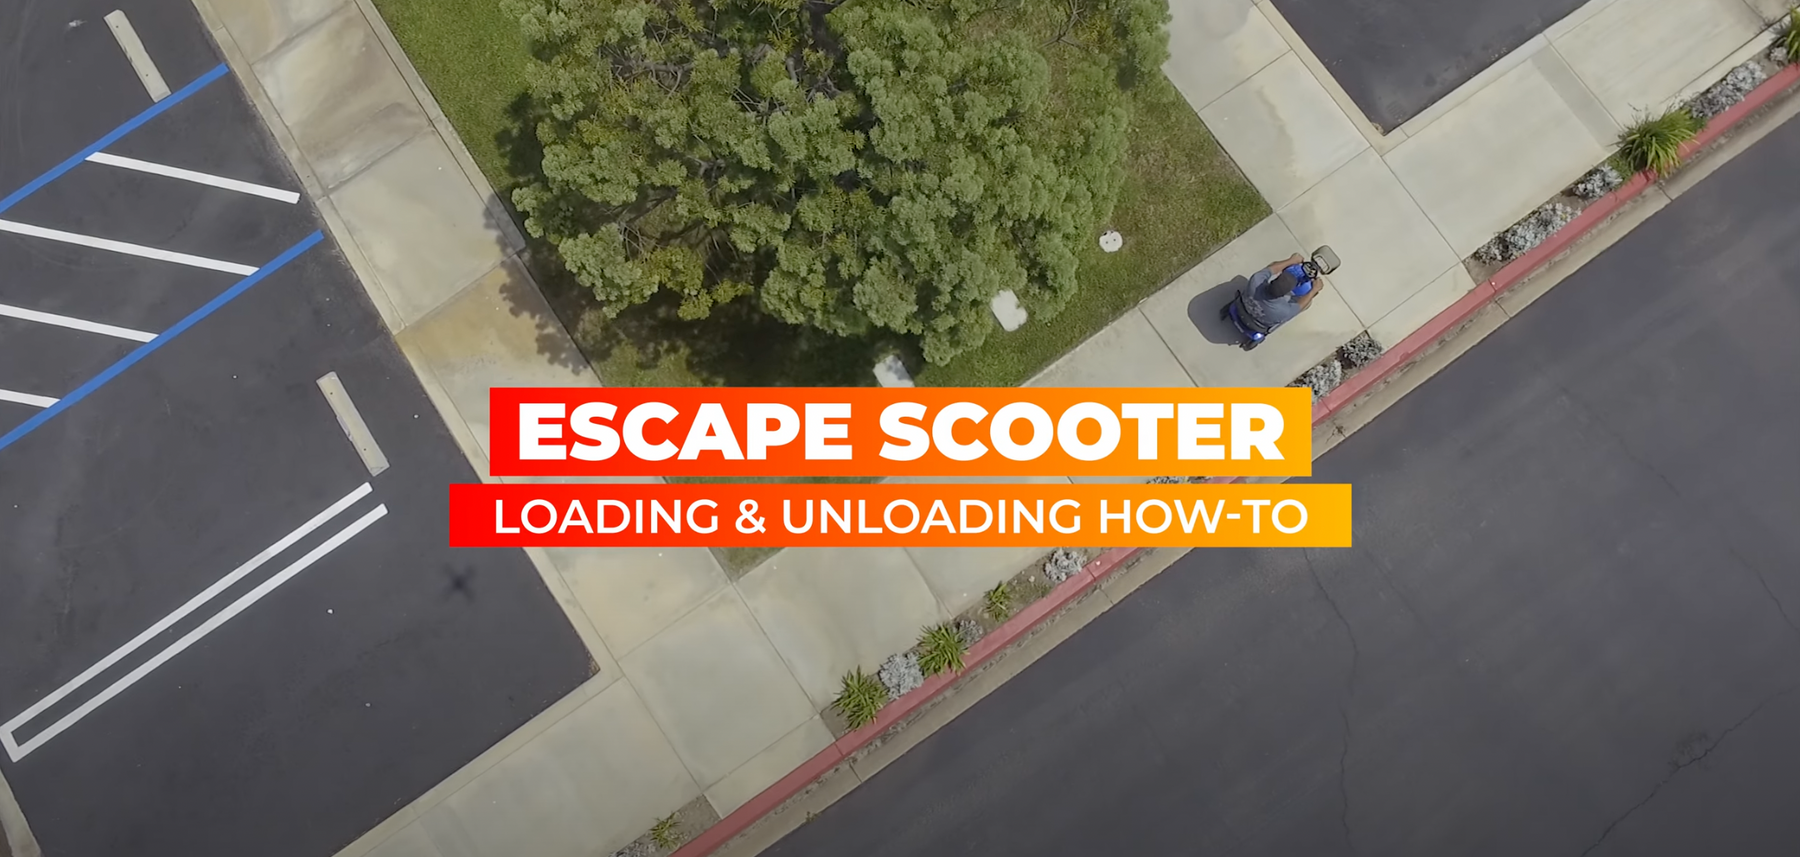 How to load and unload the Shoprider Escape scooter